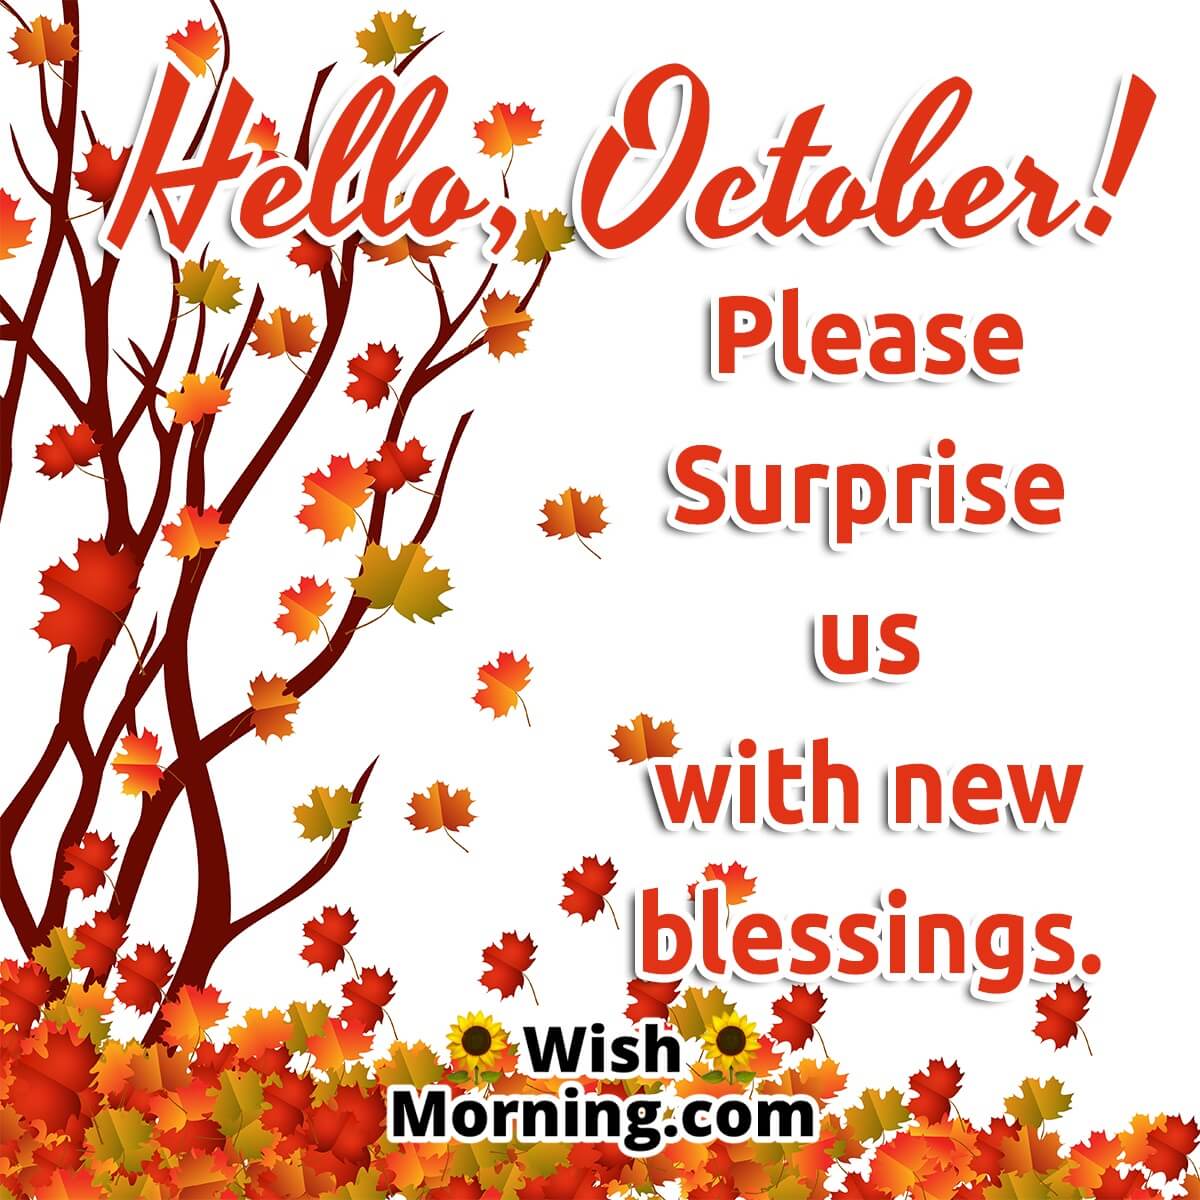 Hello October Blessings